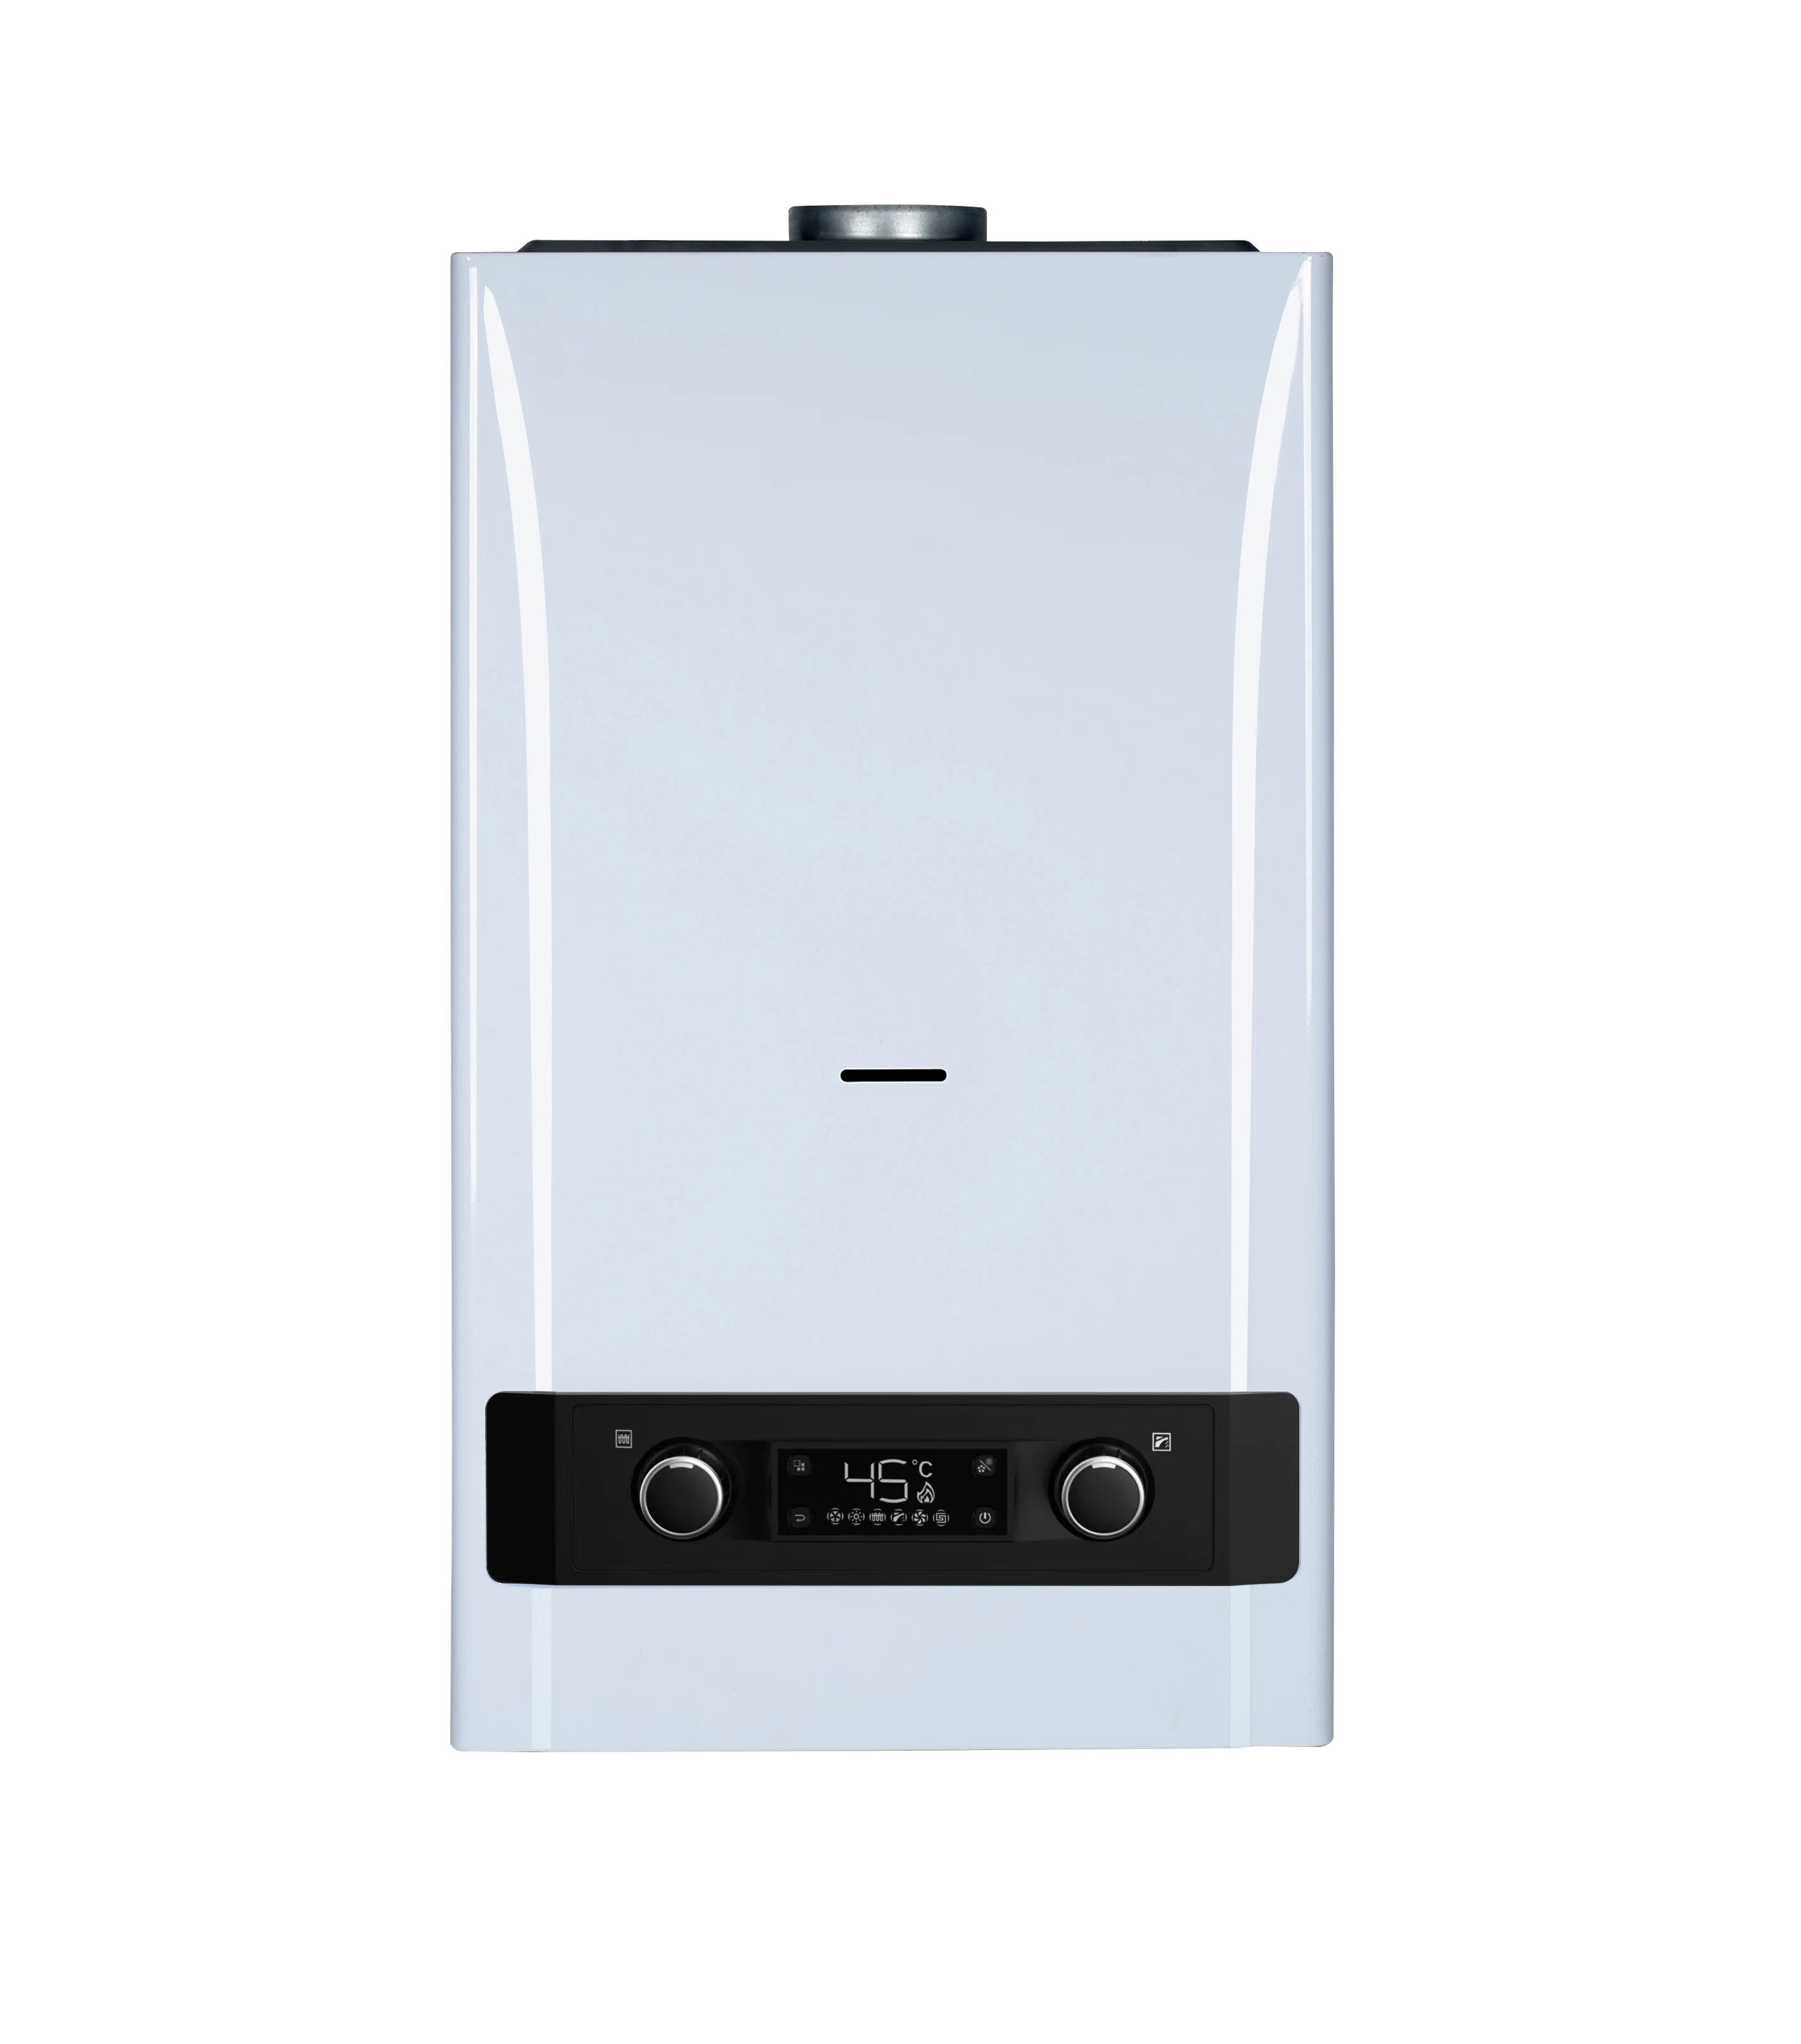 Votte Oem Instant Gas Boiler Stainless Steel Hot Water Heater For Bathroom wall hung gas boiler